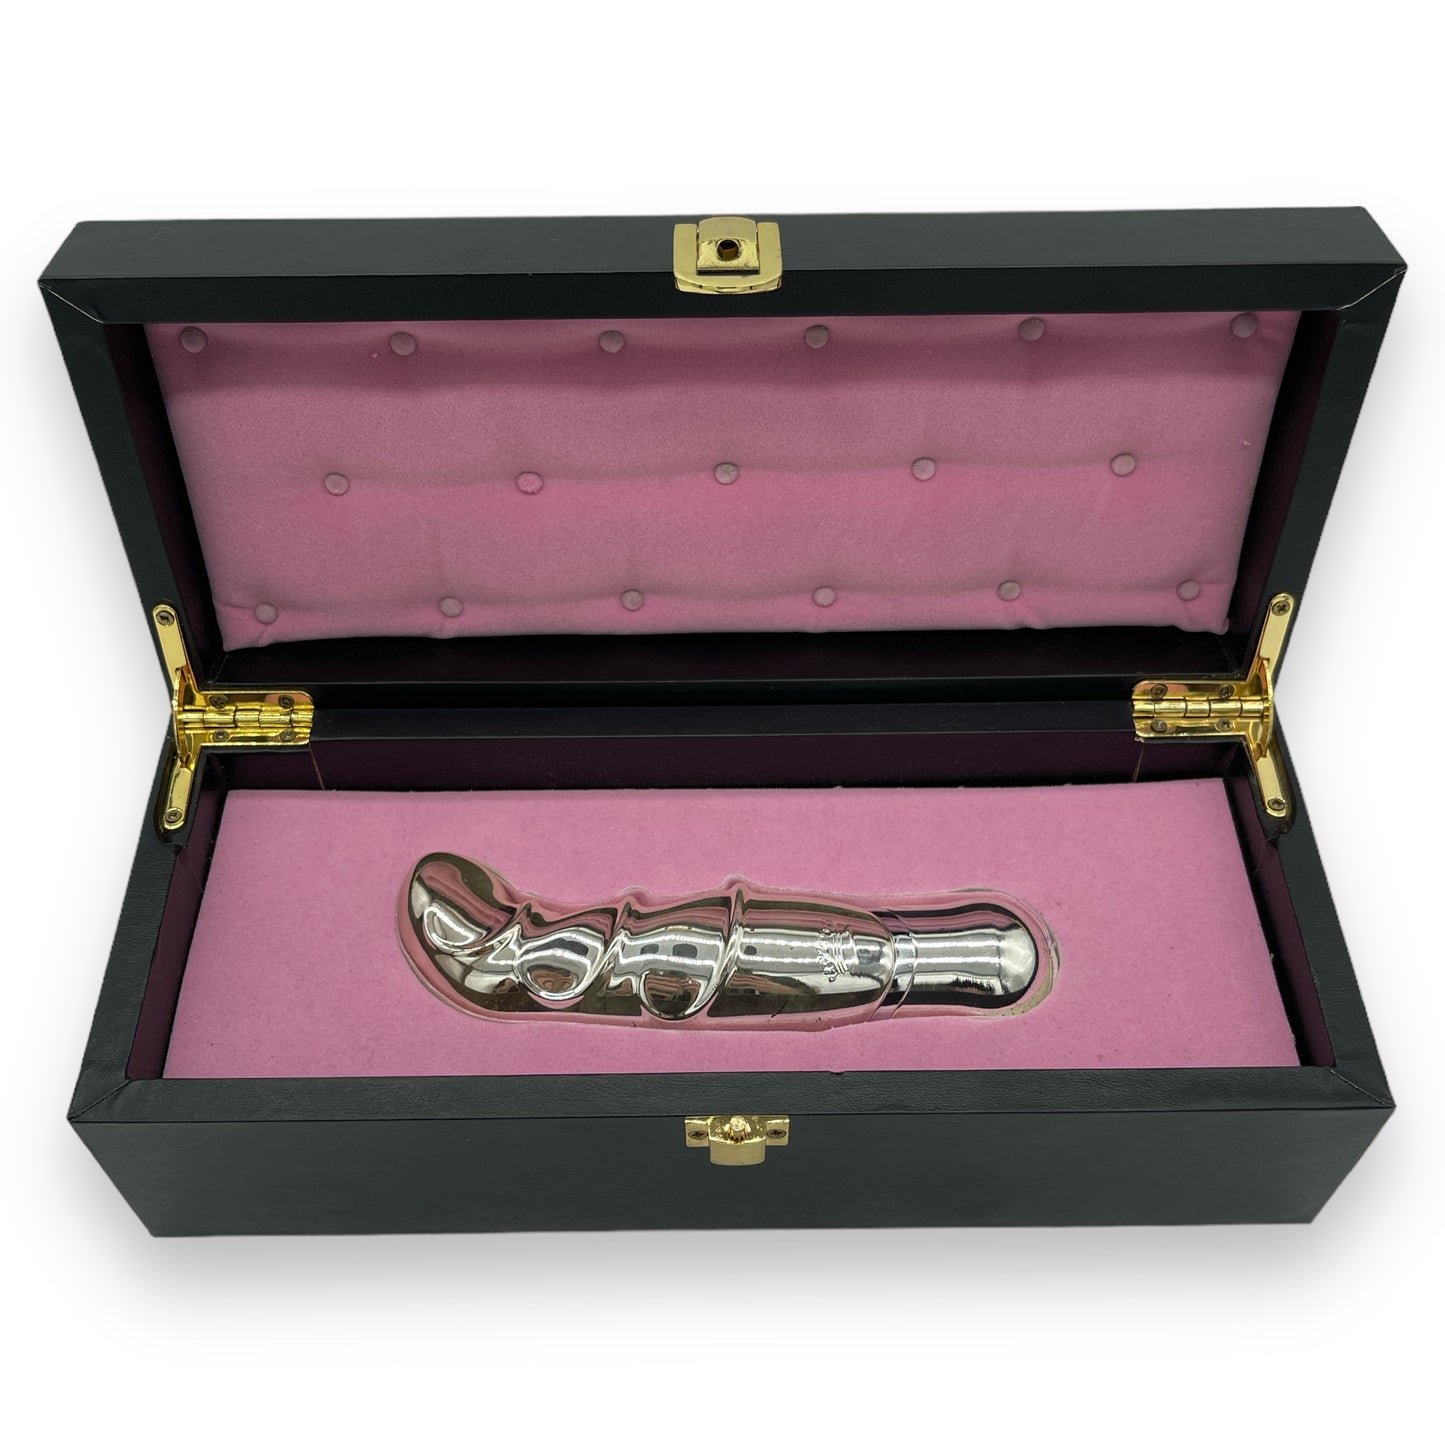 Kinky Pleasure - SC001 - Real Heavy Vibrator - Gold And Silver Series - 2 Models - 2 Colours - 1 Piece